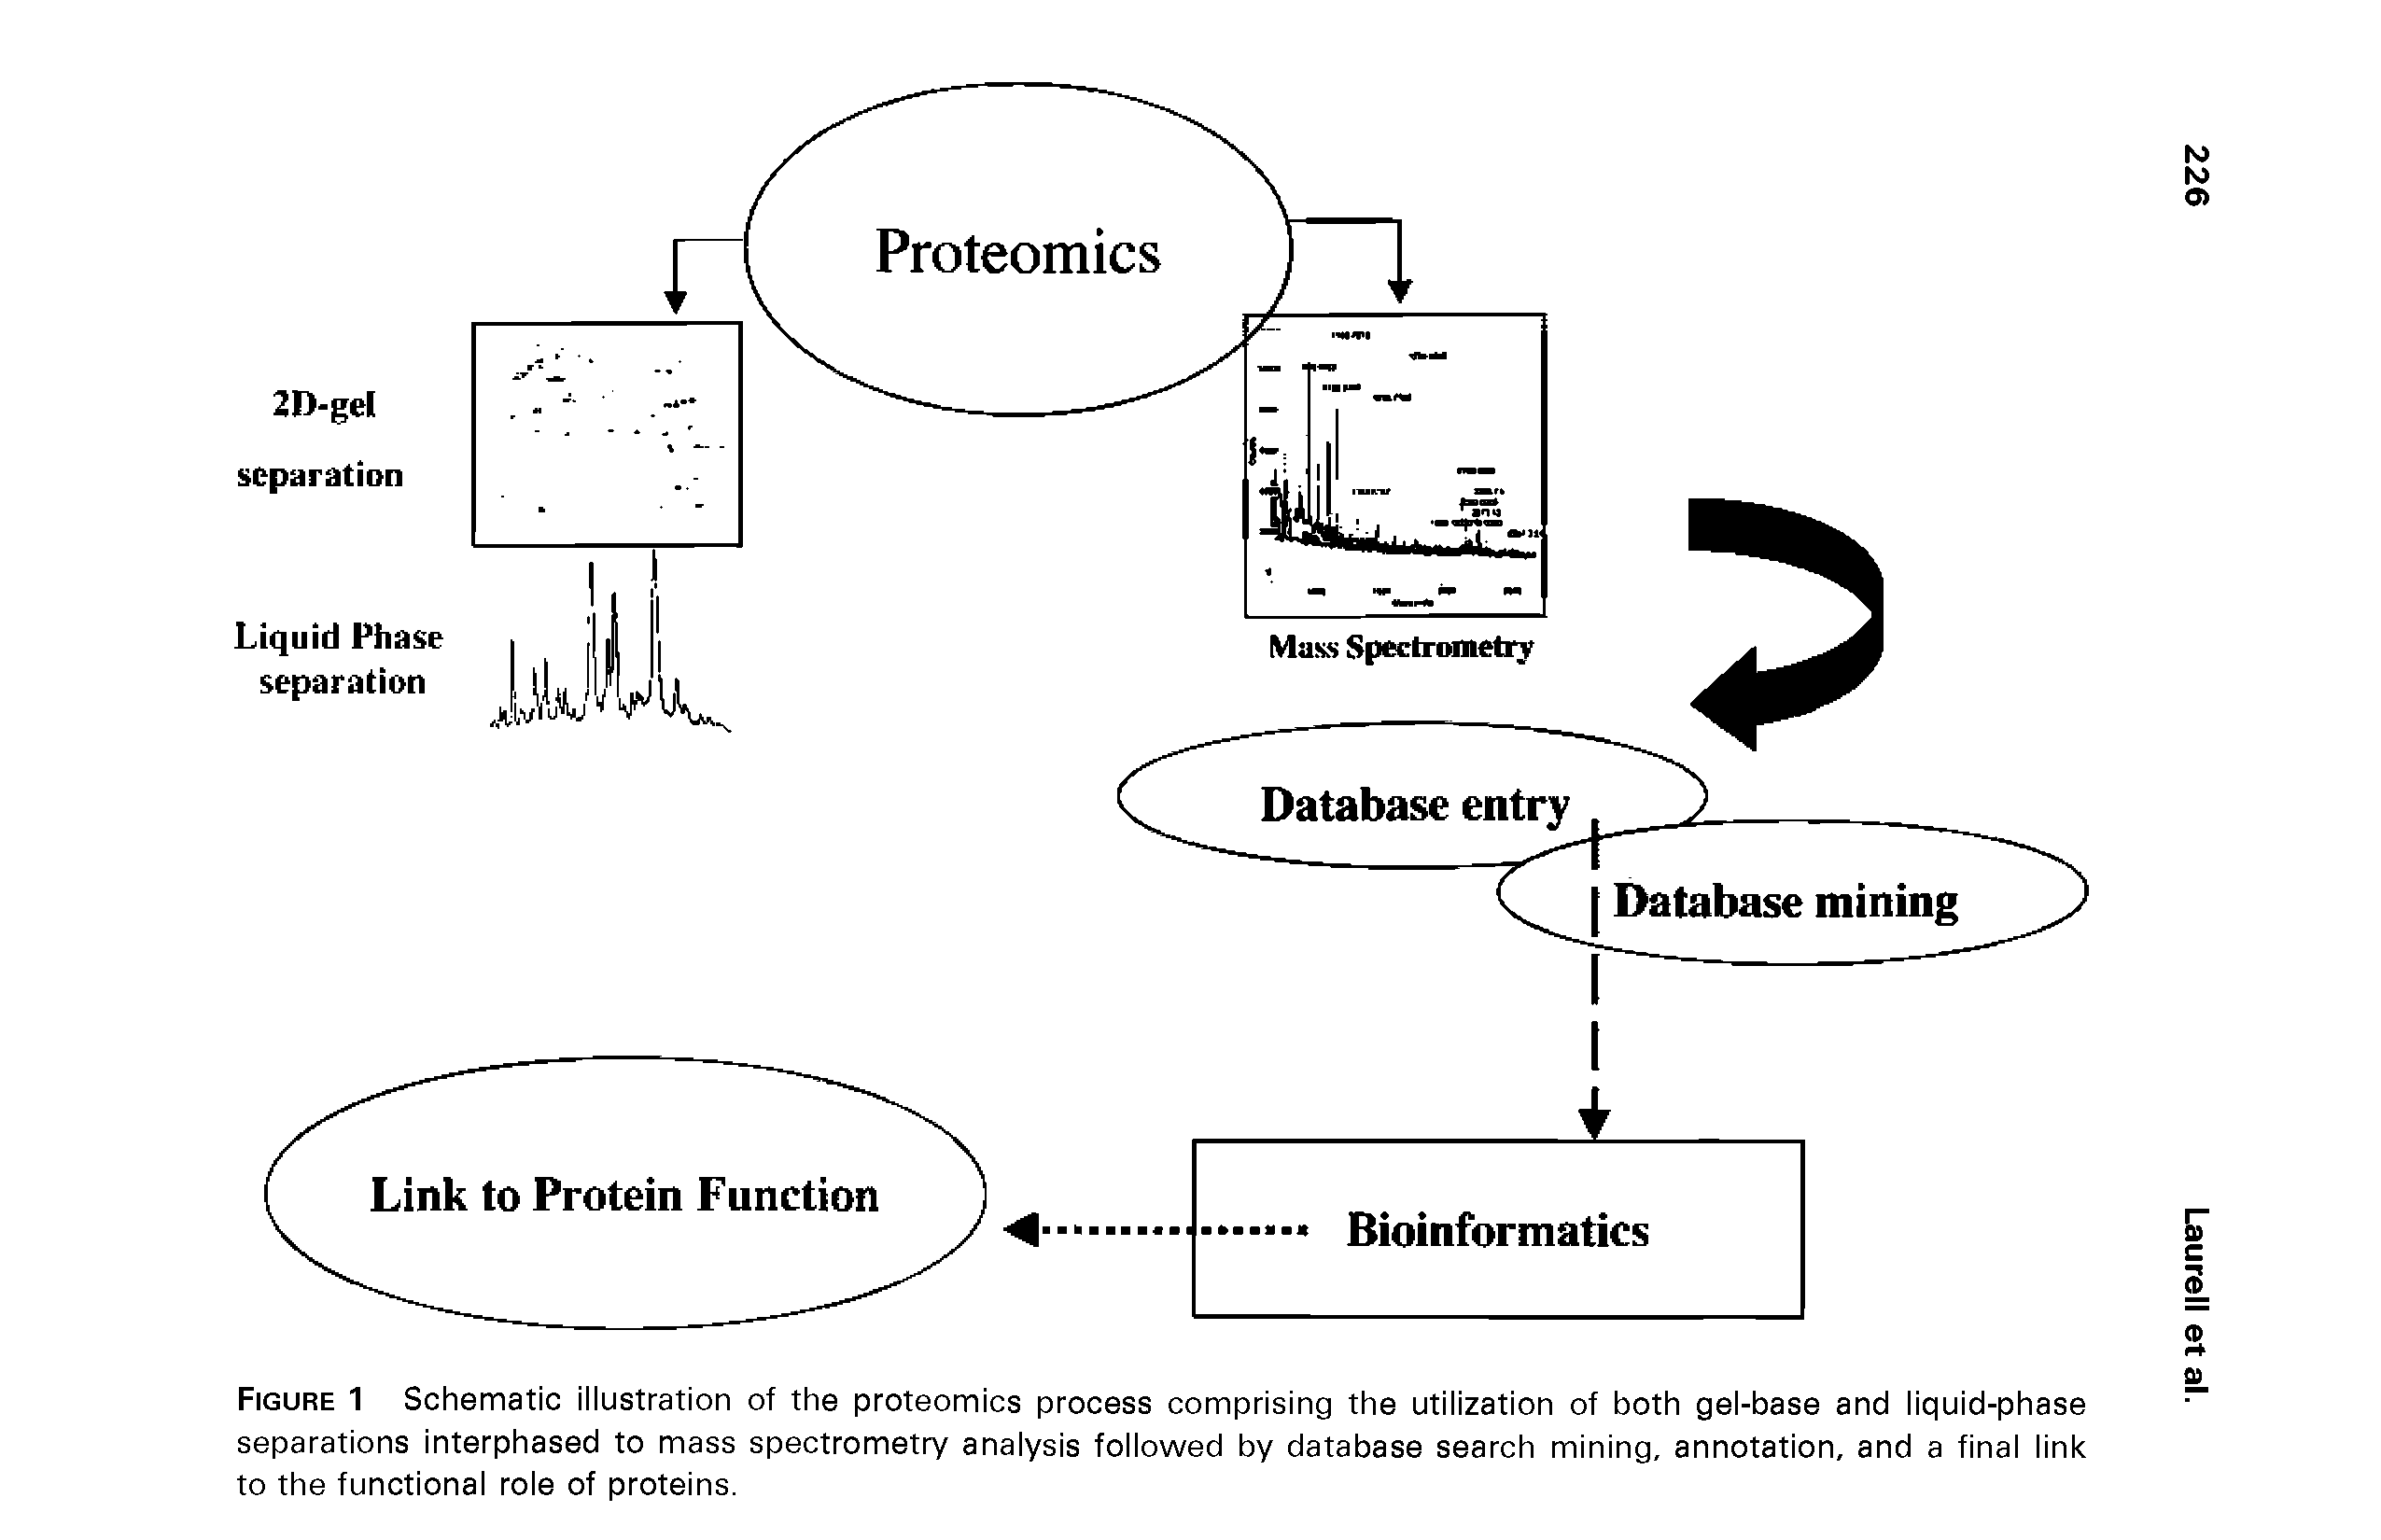 Figure 1 Schematic illustration of the proteomics process comprising the utilization of both gel-base and liquid-phase separations interphased to mass spectrometry analysis followed by database search mining, annotation, and a final link to the functional role of proteins.